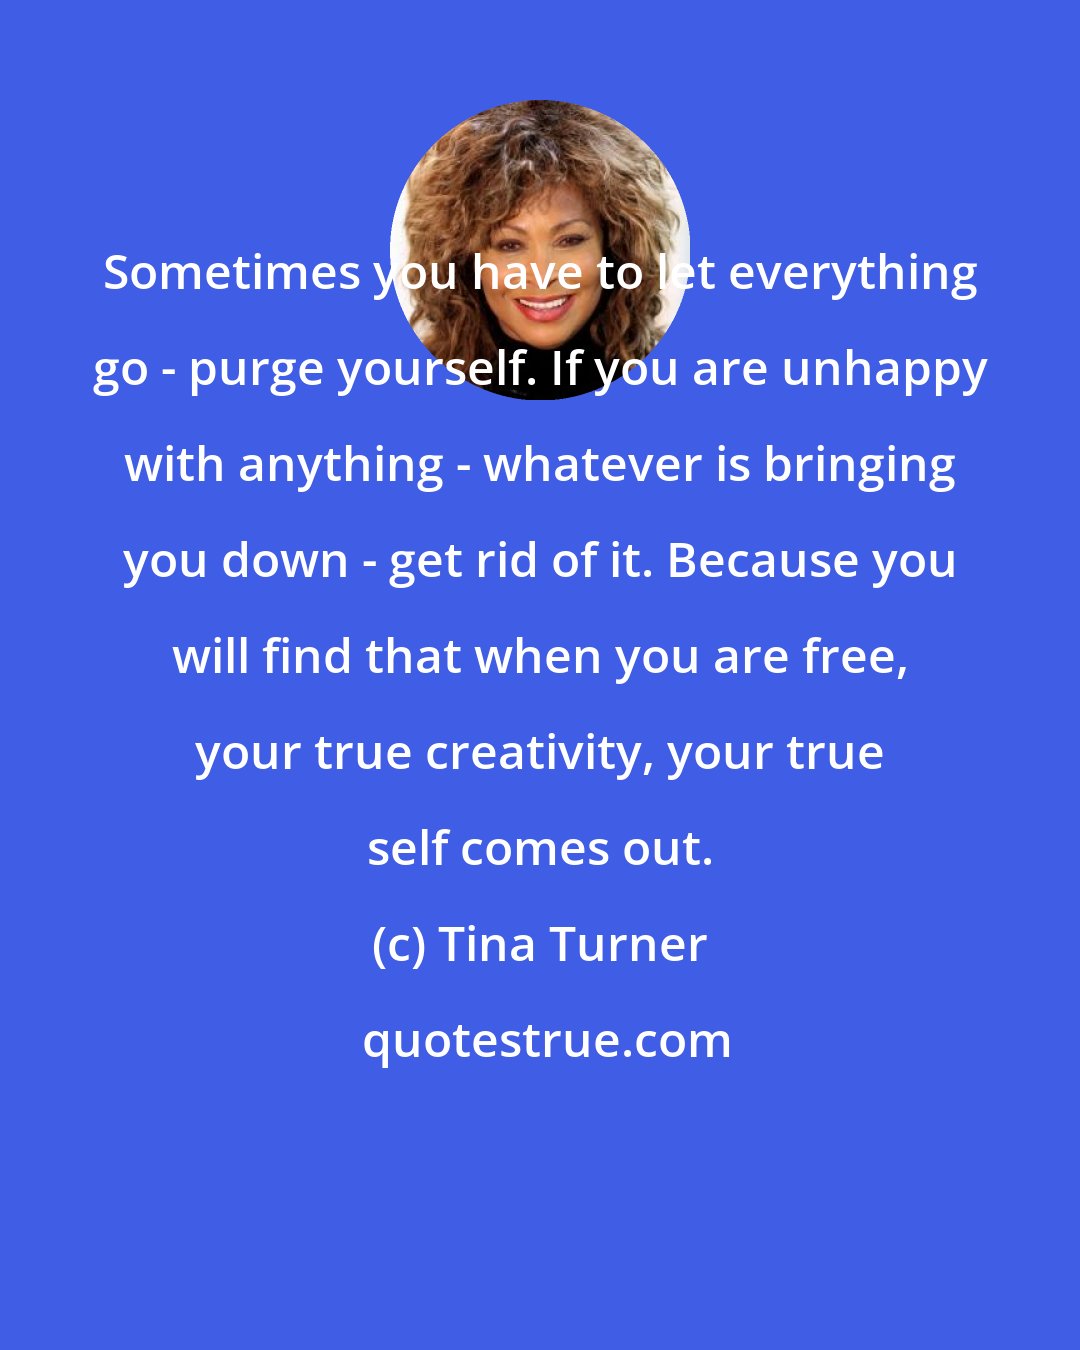 Tina Turner: Sometimes you have to let everything go - purge yourself. If you are unhappy with anything - whatever is bringing you down - get rid of it. Because you will find that when you are free, your true creativity, your true self comes out.